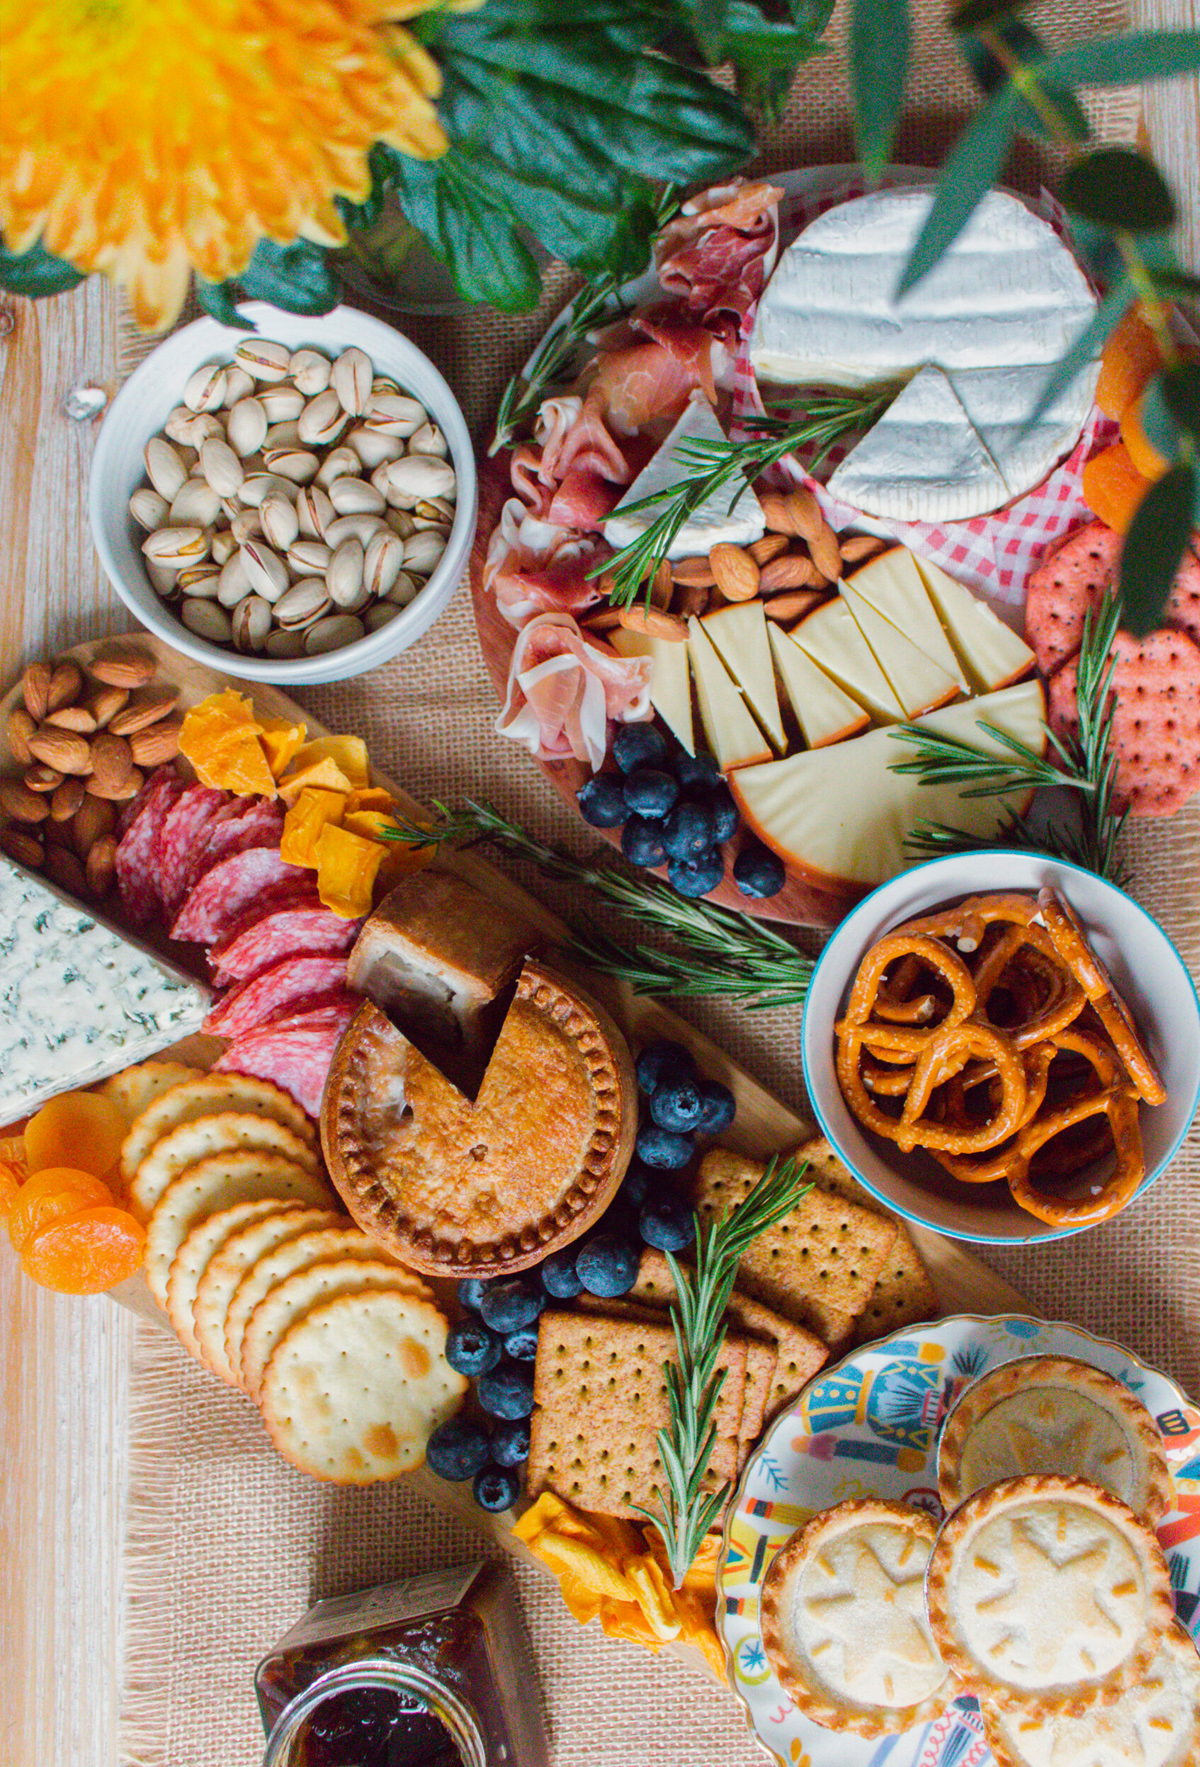 Soft and hard cheese, meats, nuts, crackers, pretzels, and dried fruit fill An Edited Lifestyles winter board.